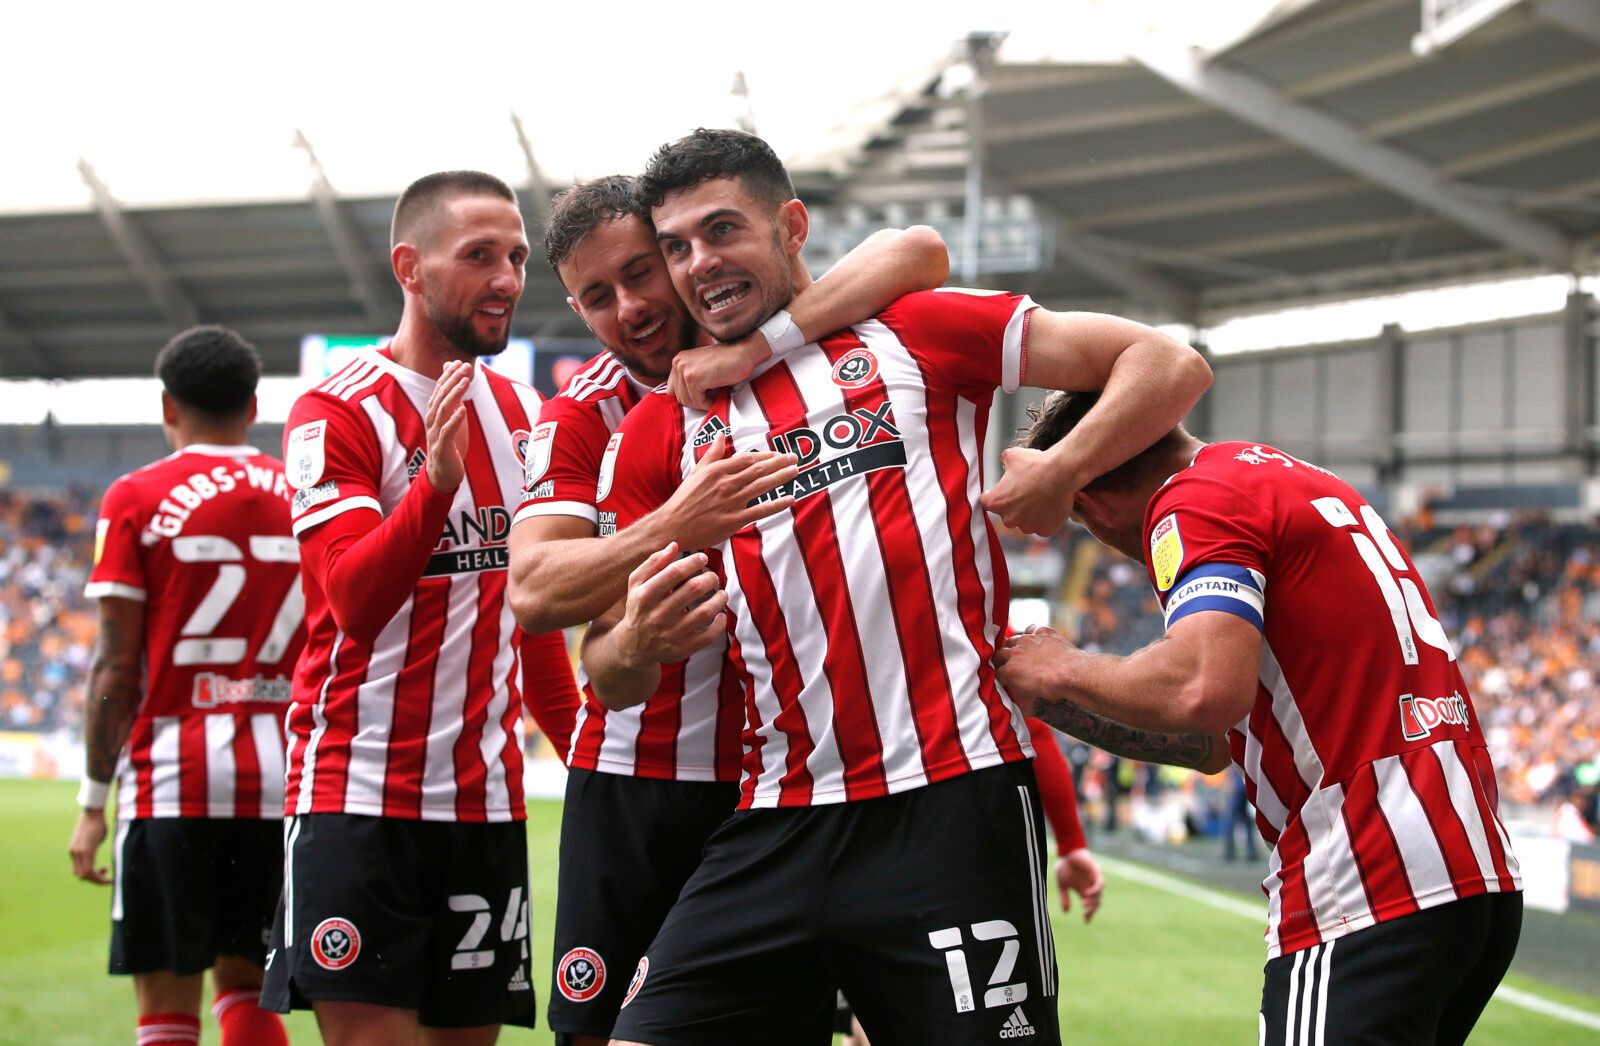 Soccer Football - Championship - Hull City v Sheffield United - KCOM Stadium, Hull, Britain - September 18, 2021 Sheffield United's John Egan celebrates scoring their second goal with teammates Action Images/Ed Sykes EDITORIAL USE ONLY. No use with unauthorized audio, video, data, fixture lists, club/league logos or 'live' services. Online in-match use limited to 75 images, no video emulation. No use in betting, games or single club /league/player publications.  Please contact your account repre